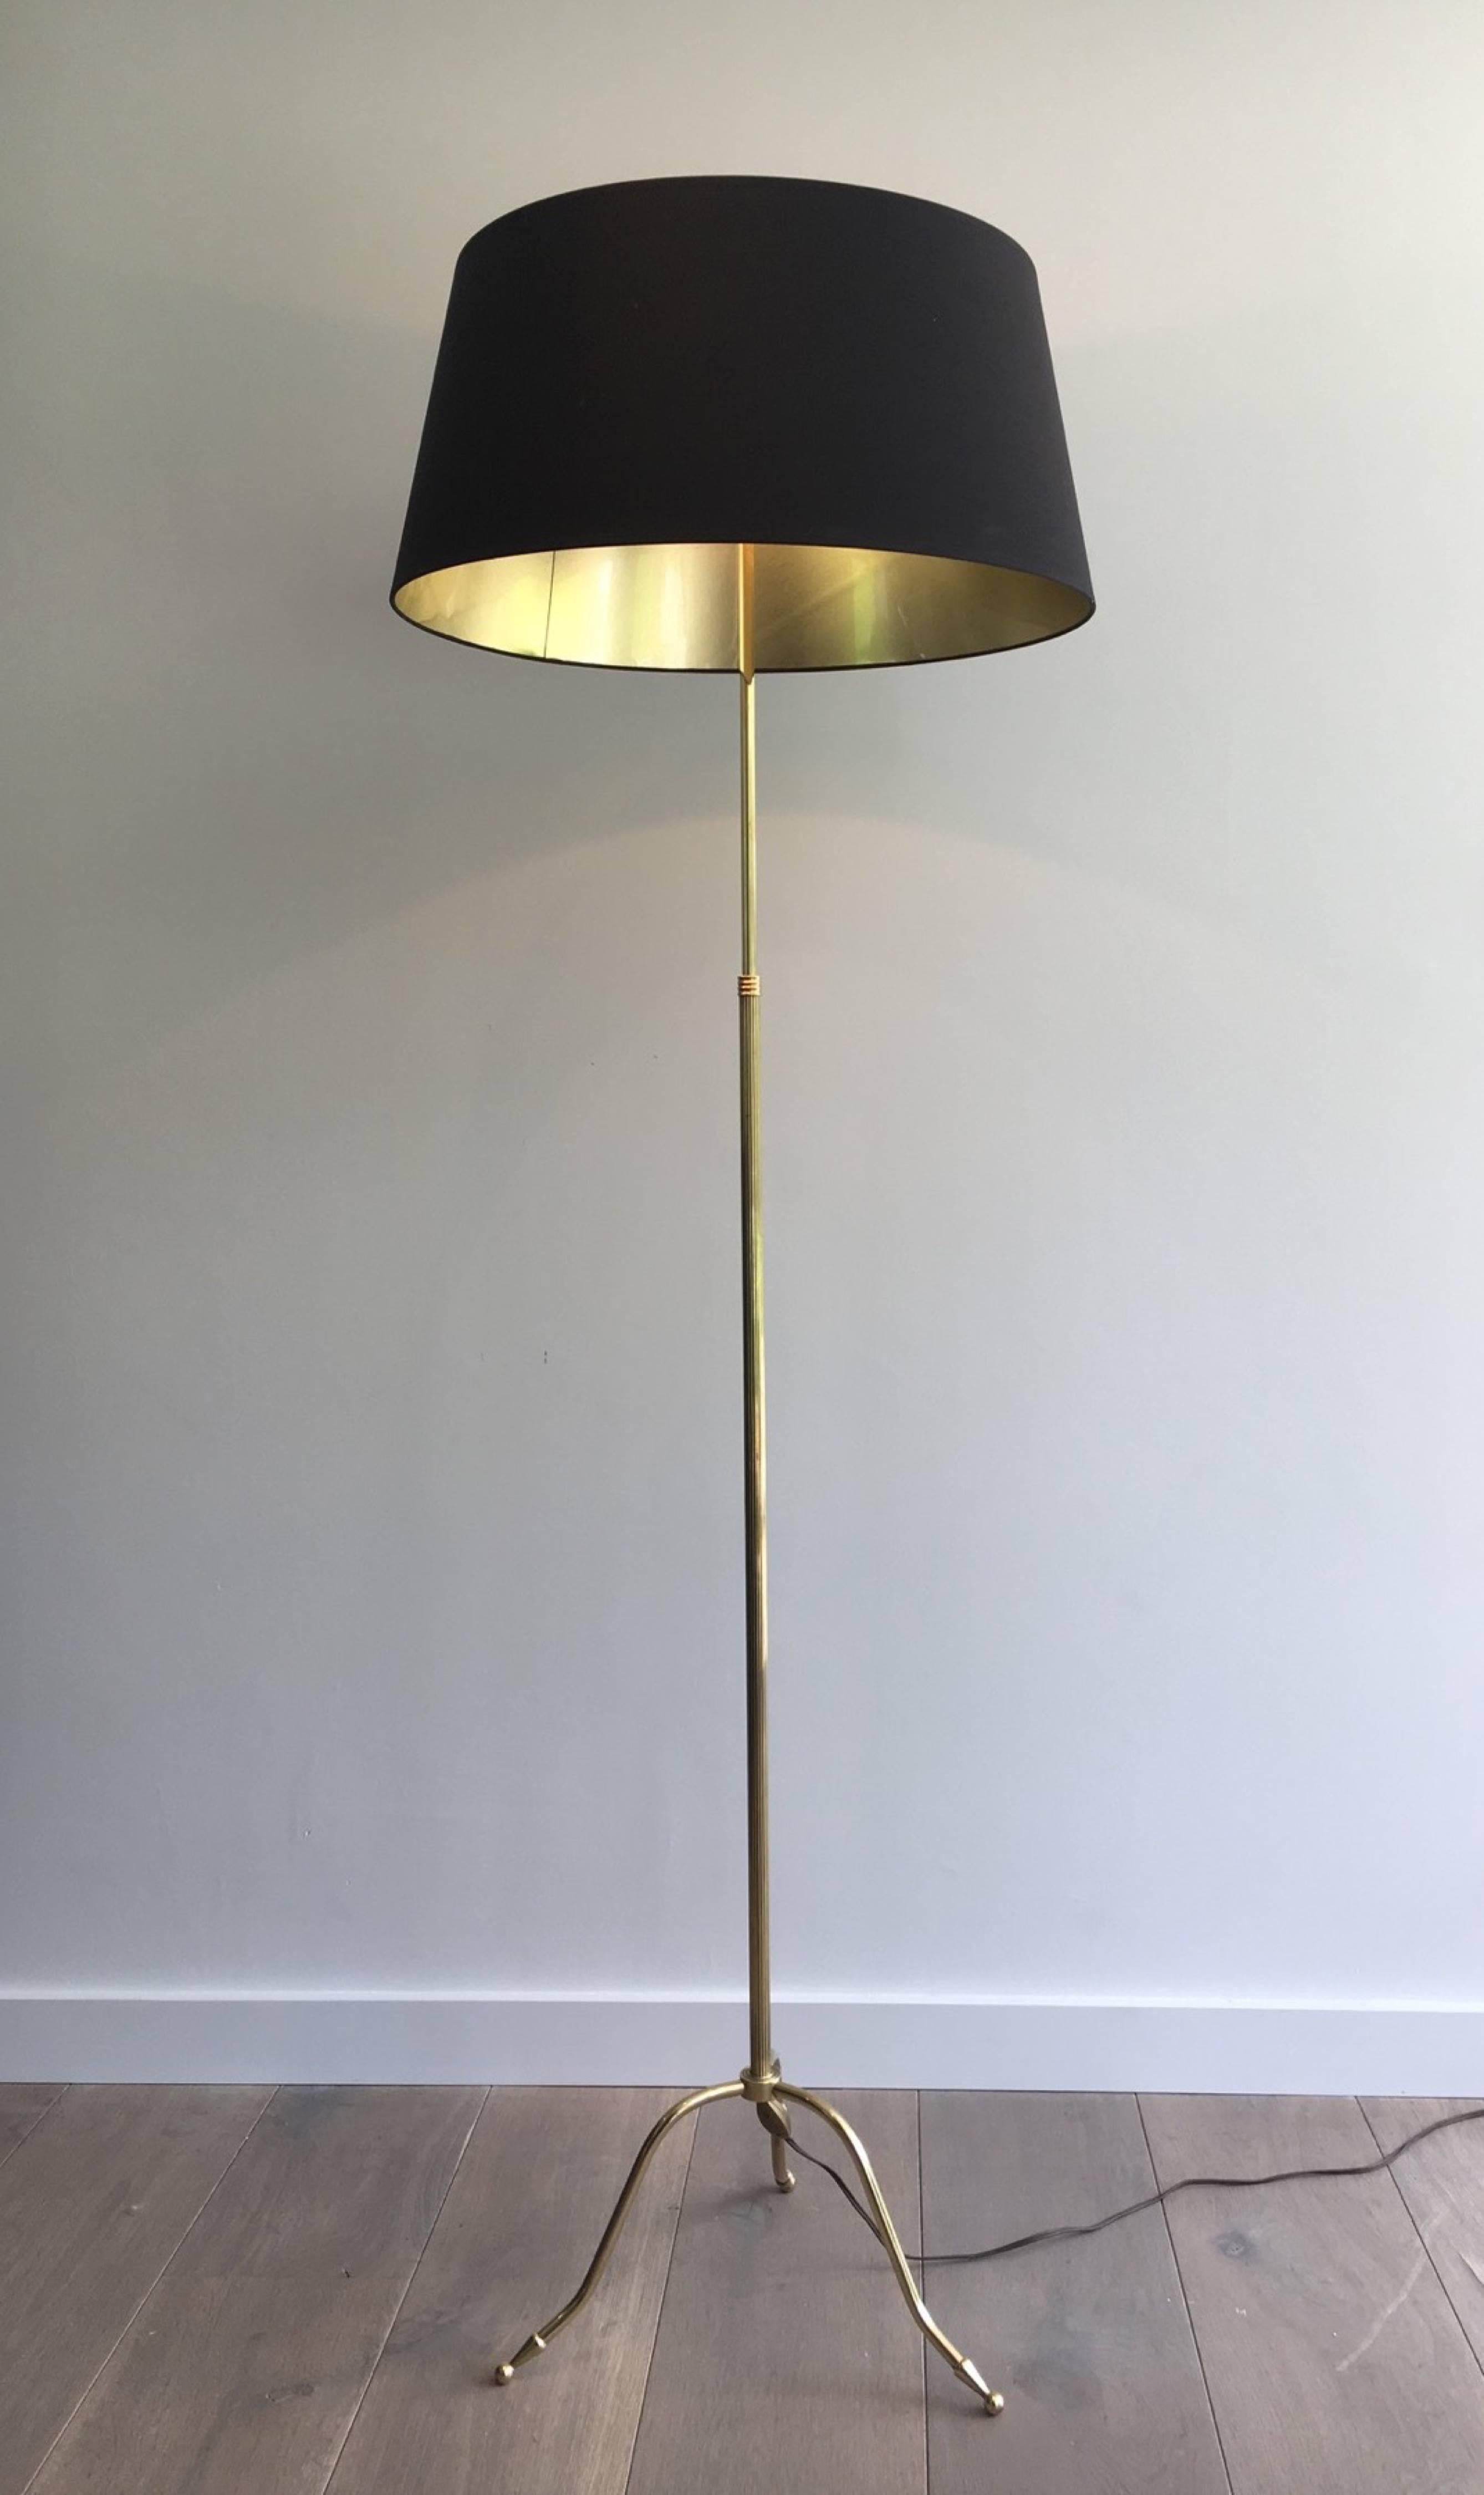 1940s French Maison Jansen style floor lamp with tripod base and gold lined shade.

This piece is currently in France, please allow 4 to 6 weeks for delivery. Shipping to our warehouse in Long Island City, New York is included in the price.